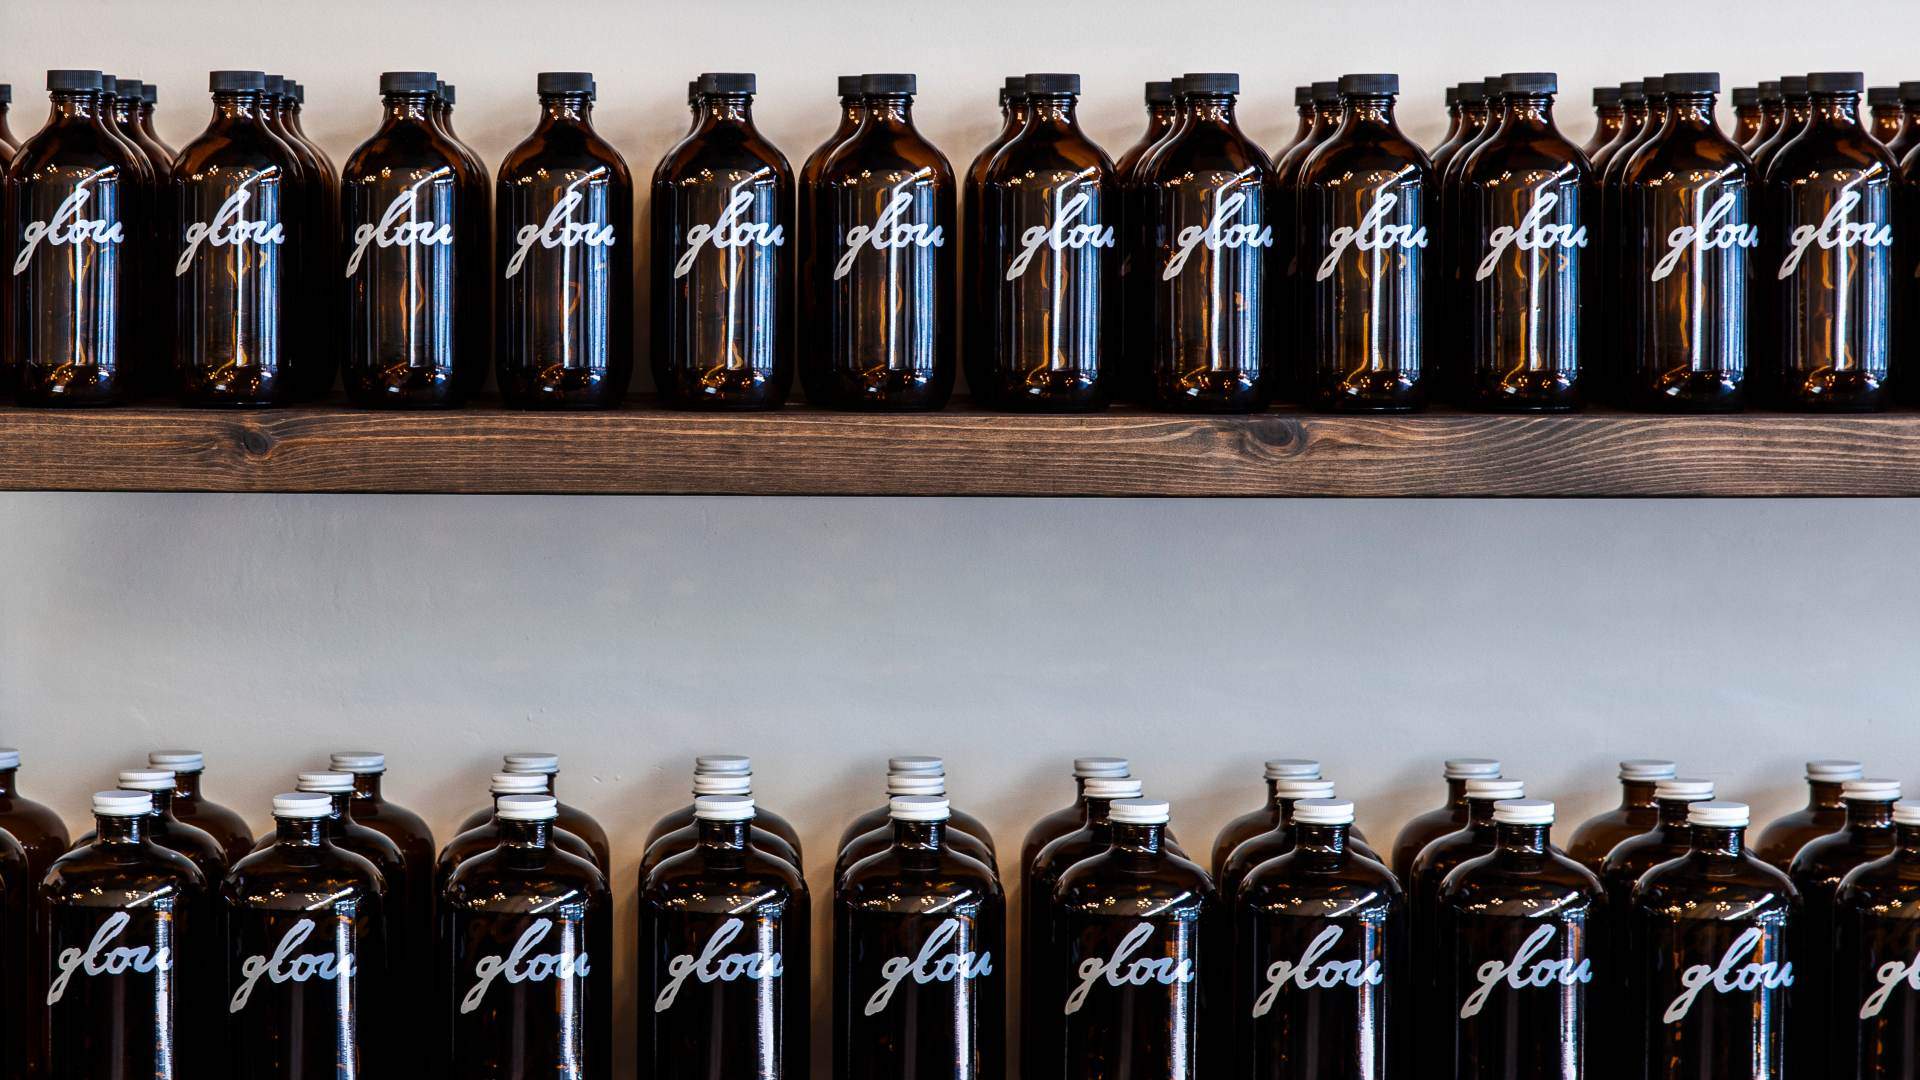 Glou Is Collingwood's New Bar and Dispensary Selling Wine by the Litre